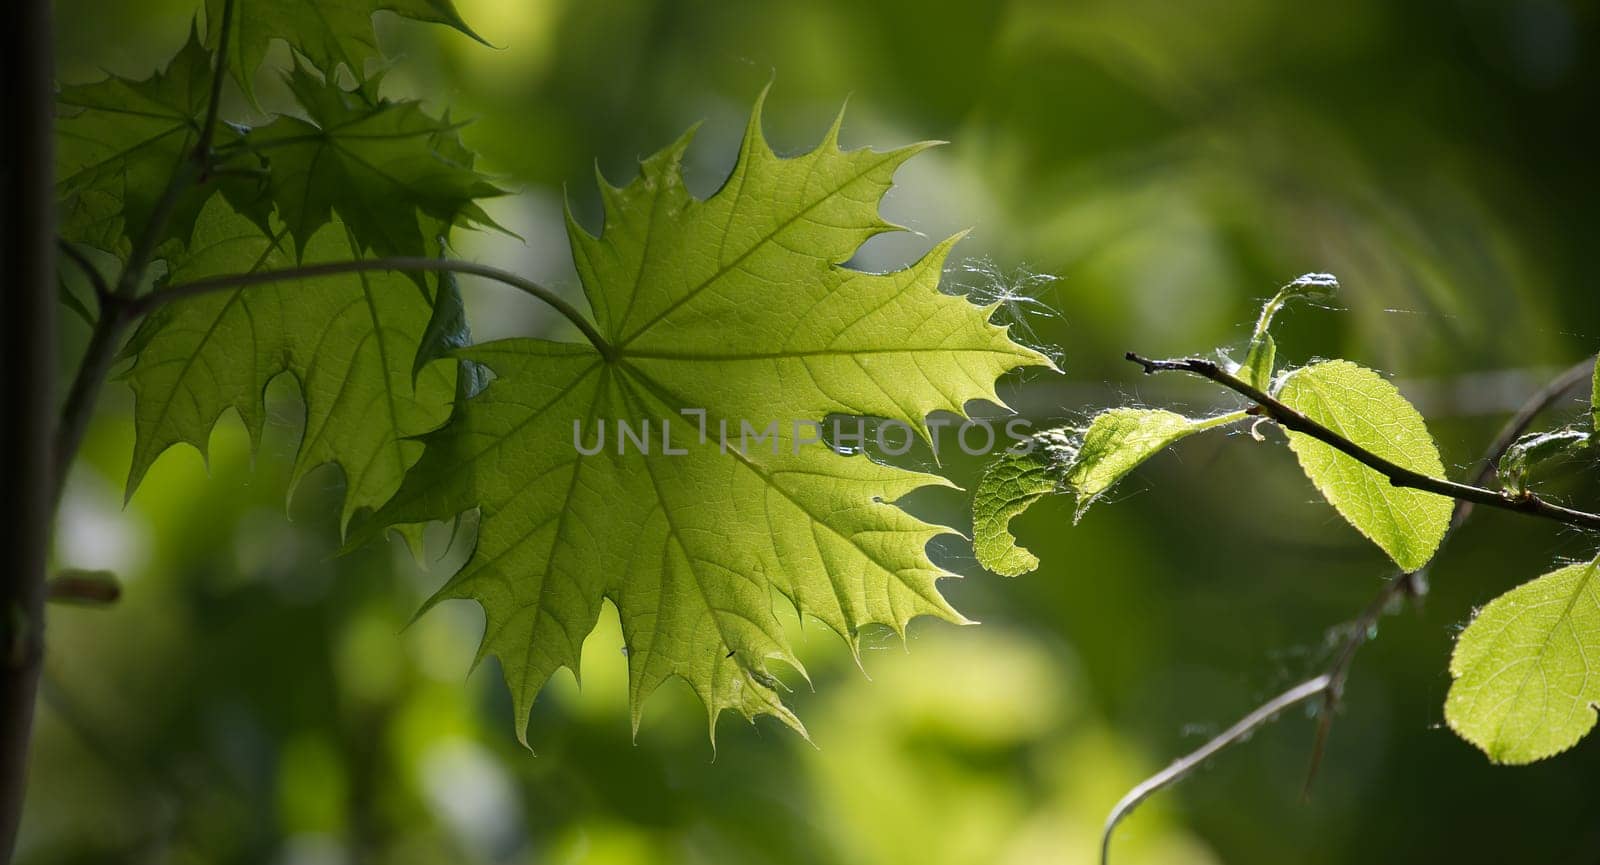 Maple leaves highlighted by the sunlight shining through it by NetPix